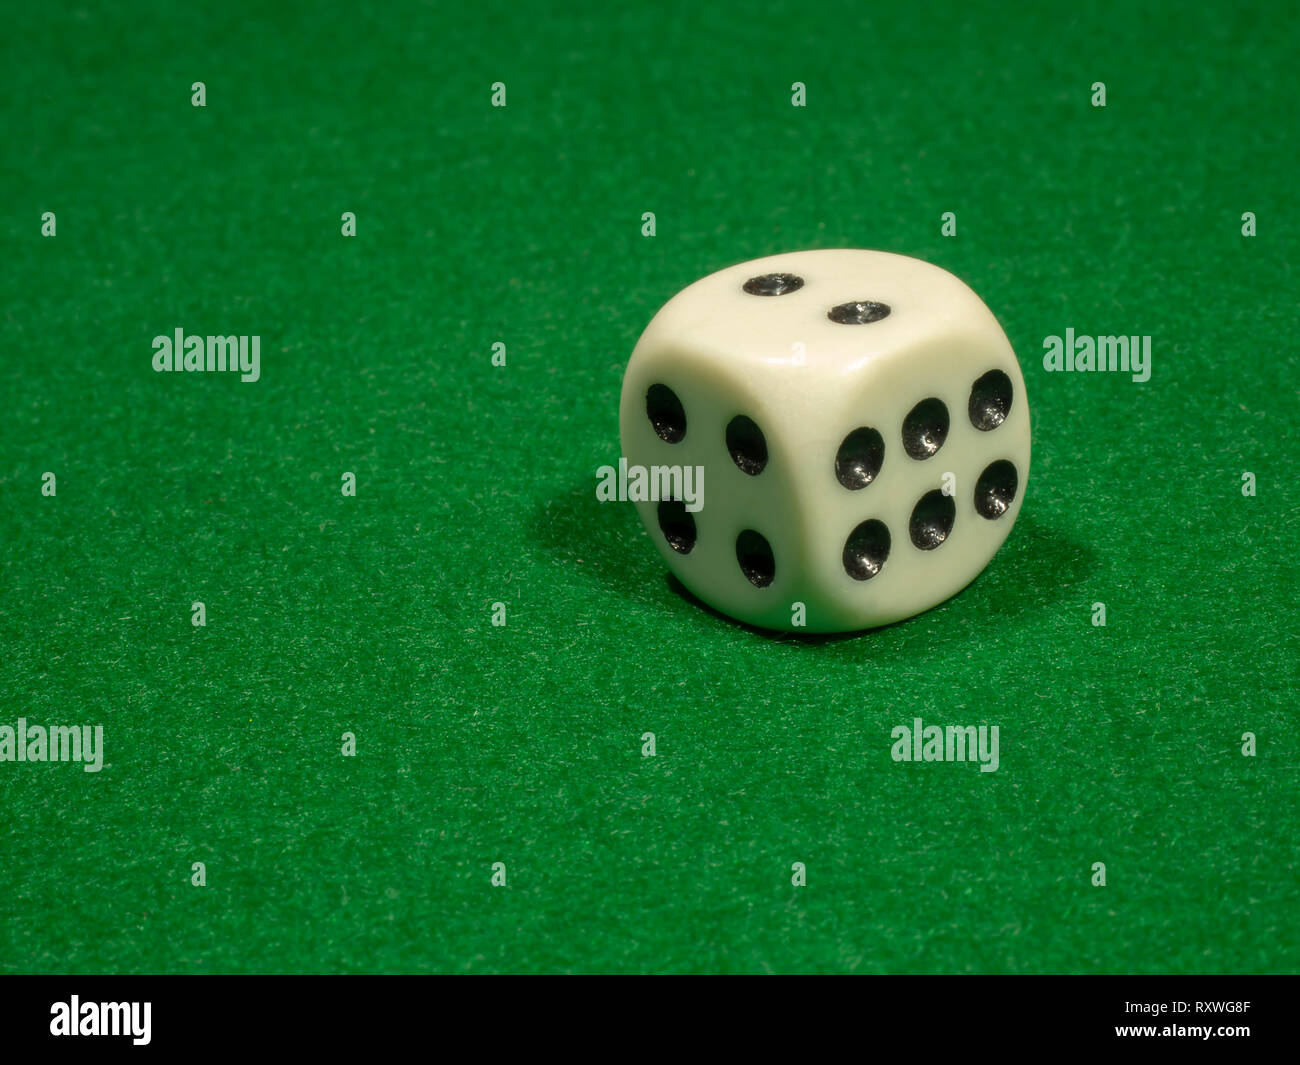 The bone cube of white color with black points for gamblings lies on green cloth. Stock Photo